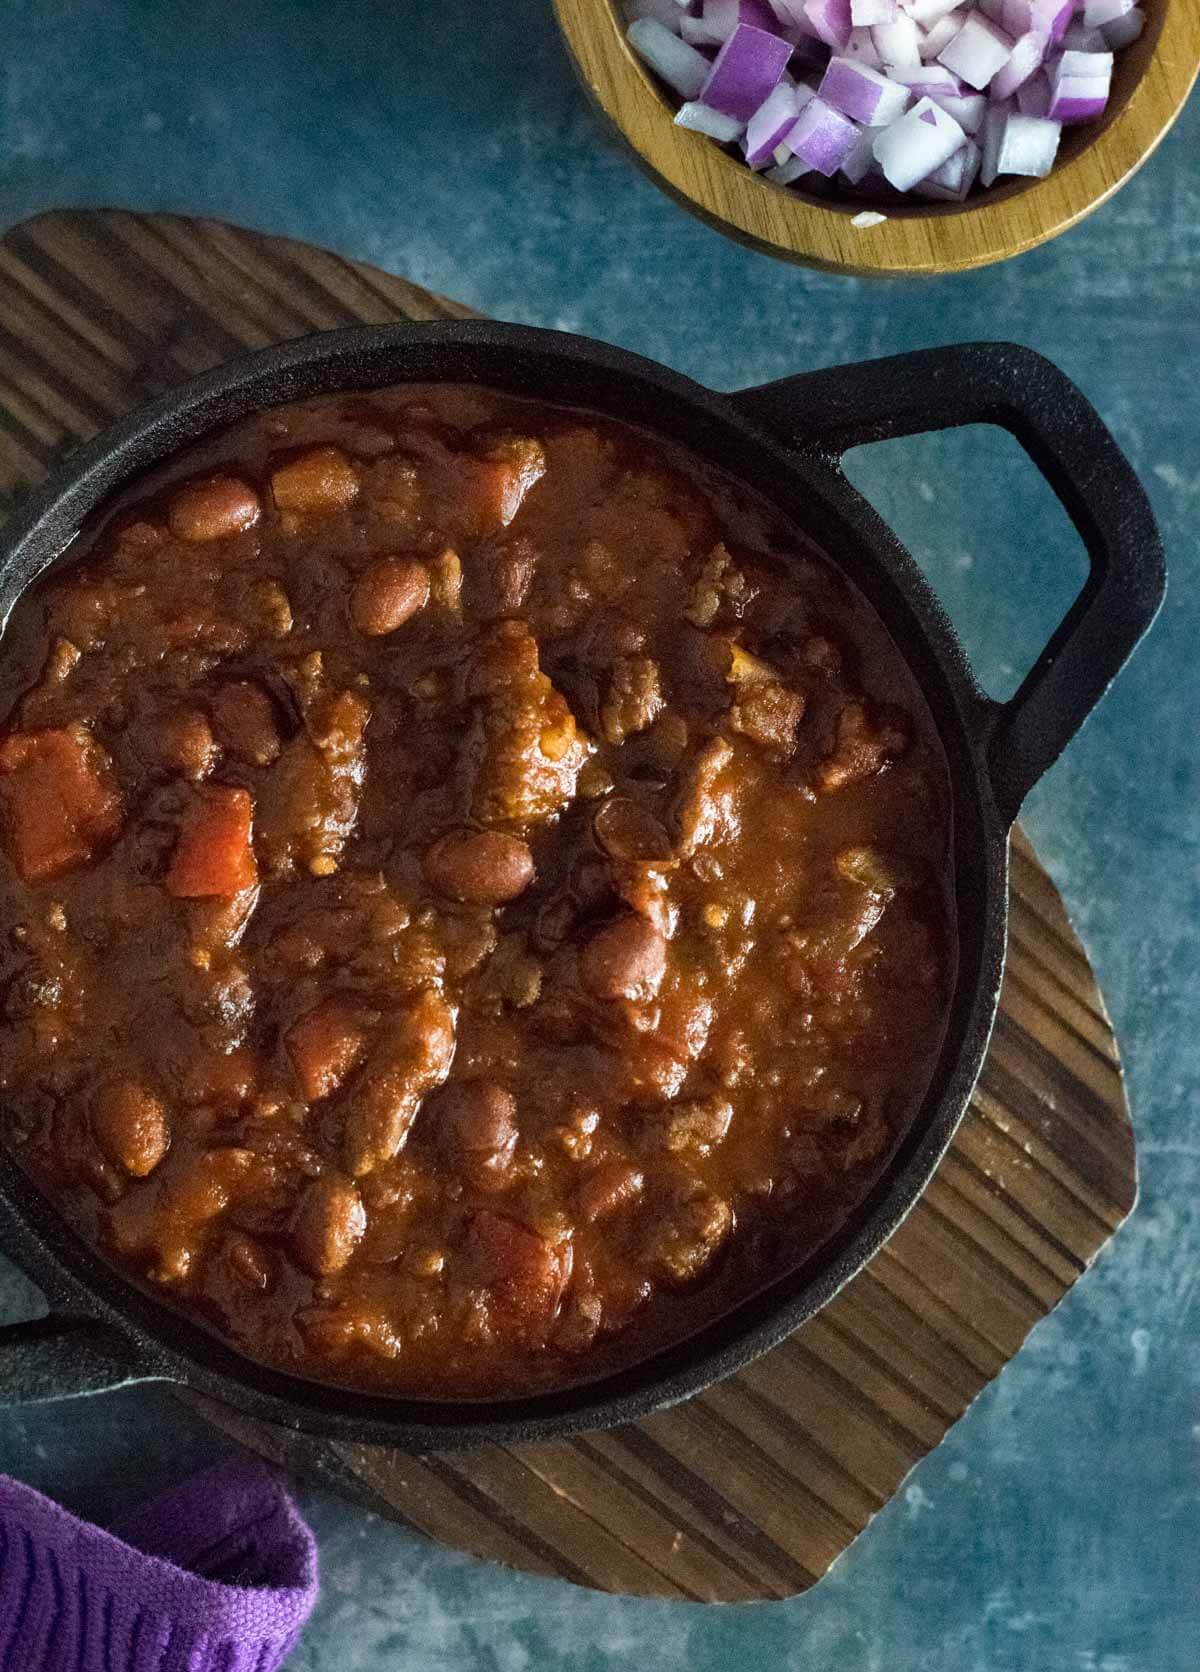 Making a pot of chili with beef and chorizo.